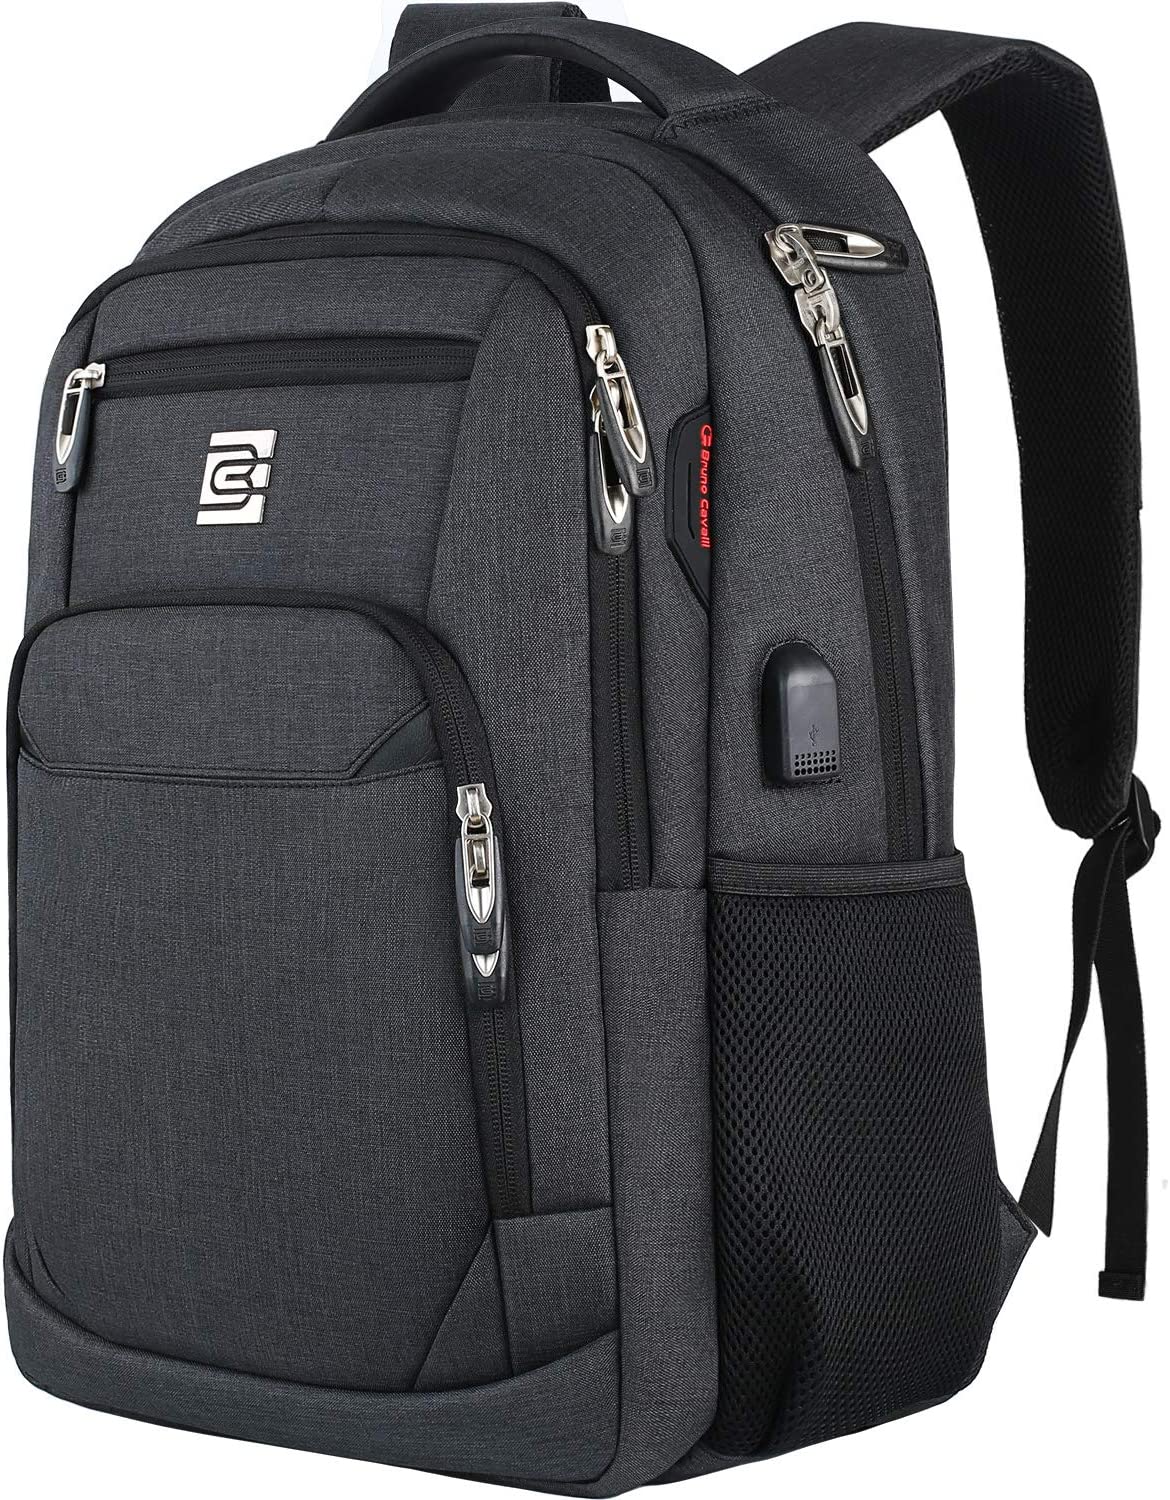 Laptop Backpack,Business Travel Anti Theft Slim [...]